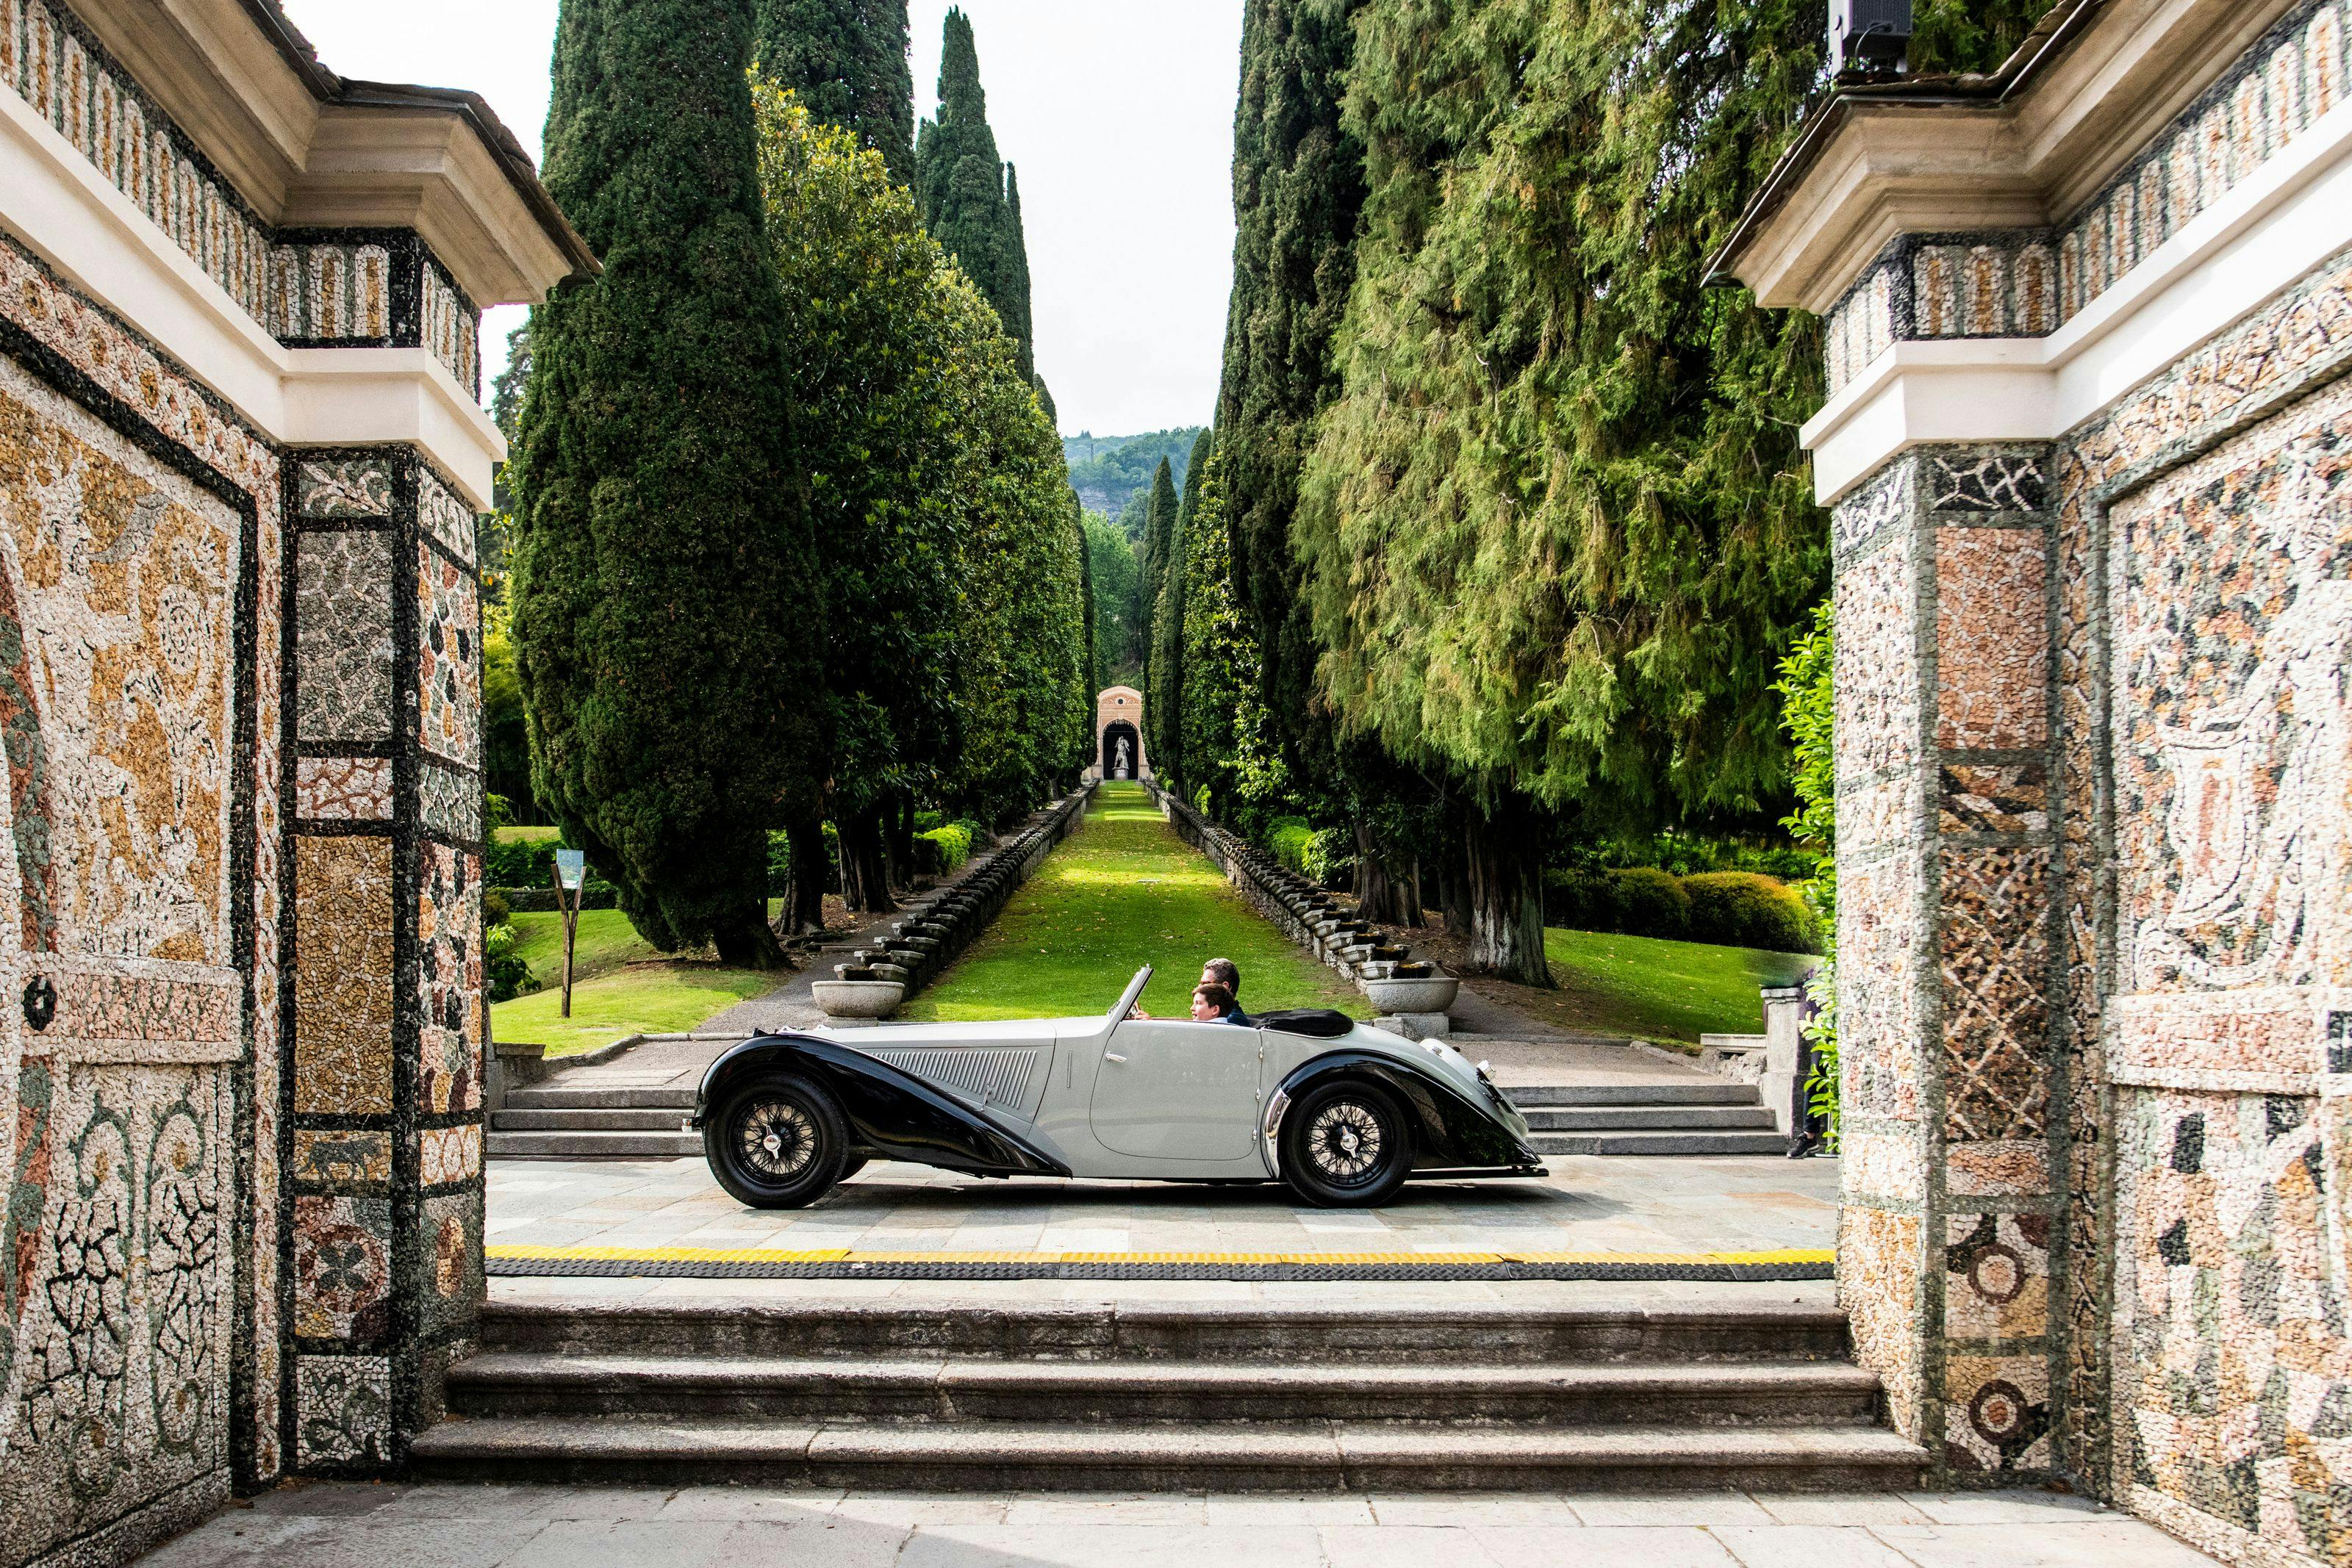 Bugatti wins several times at Concorso d’Eleganza with the ‘Best of Show’ award, the ‘Fiva Trophy’and the ‘Design award’